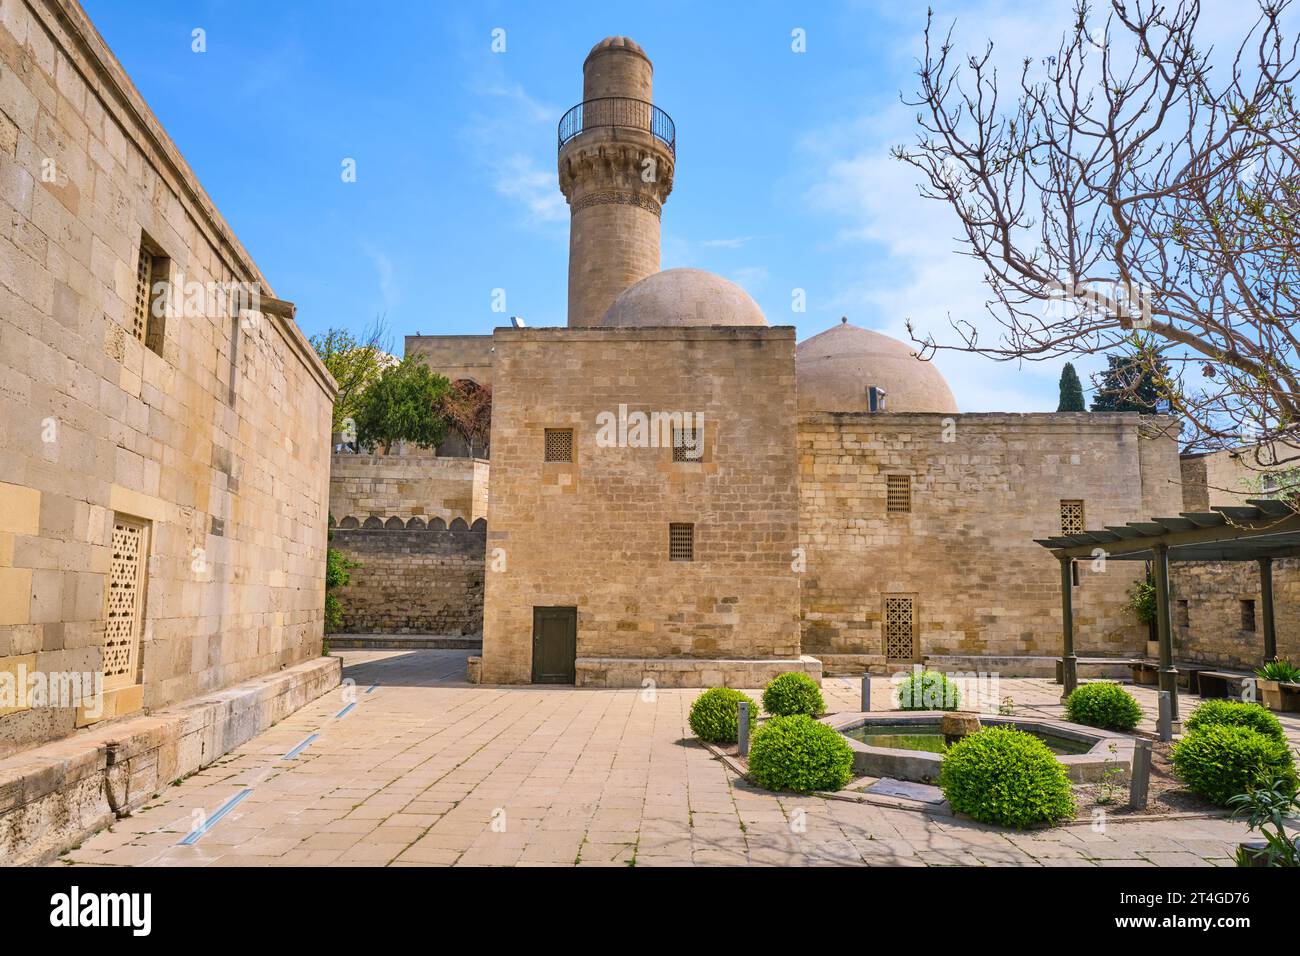 Exterior view of the Shah Mosque, Şah Məscidi and its minaret. At the Palace of the Shirvanshahs complex in the Old City section of Baku, Azerbaijan. Stock Photo